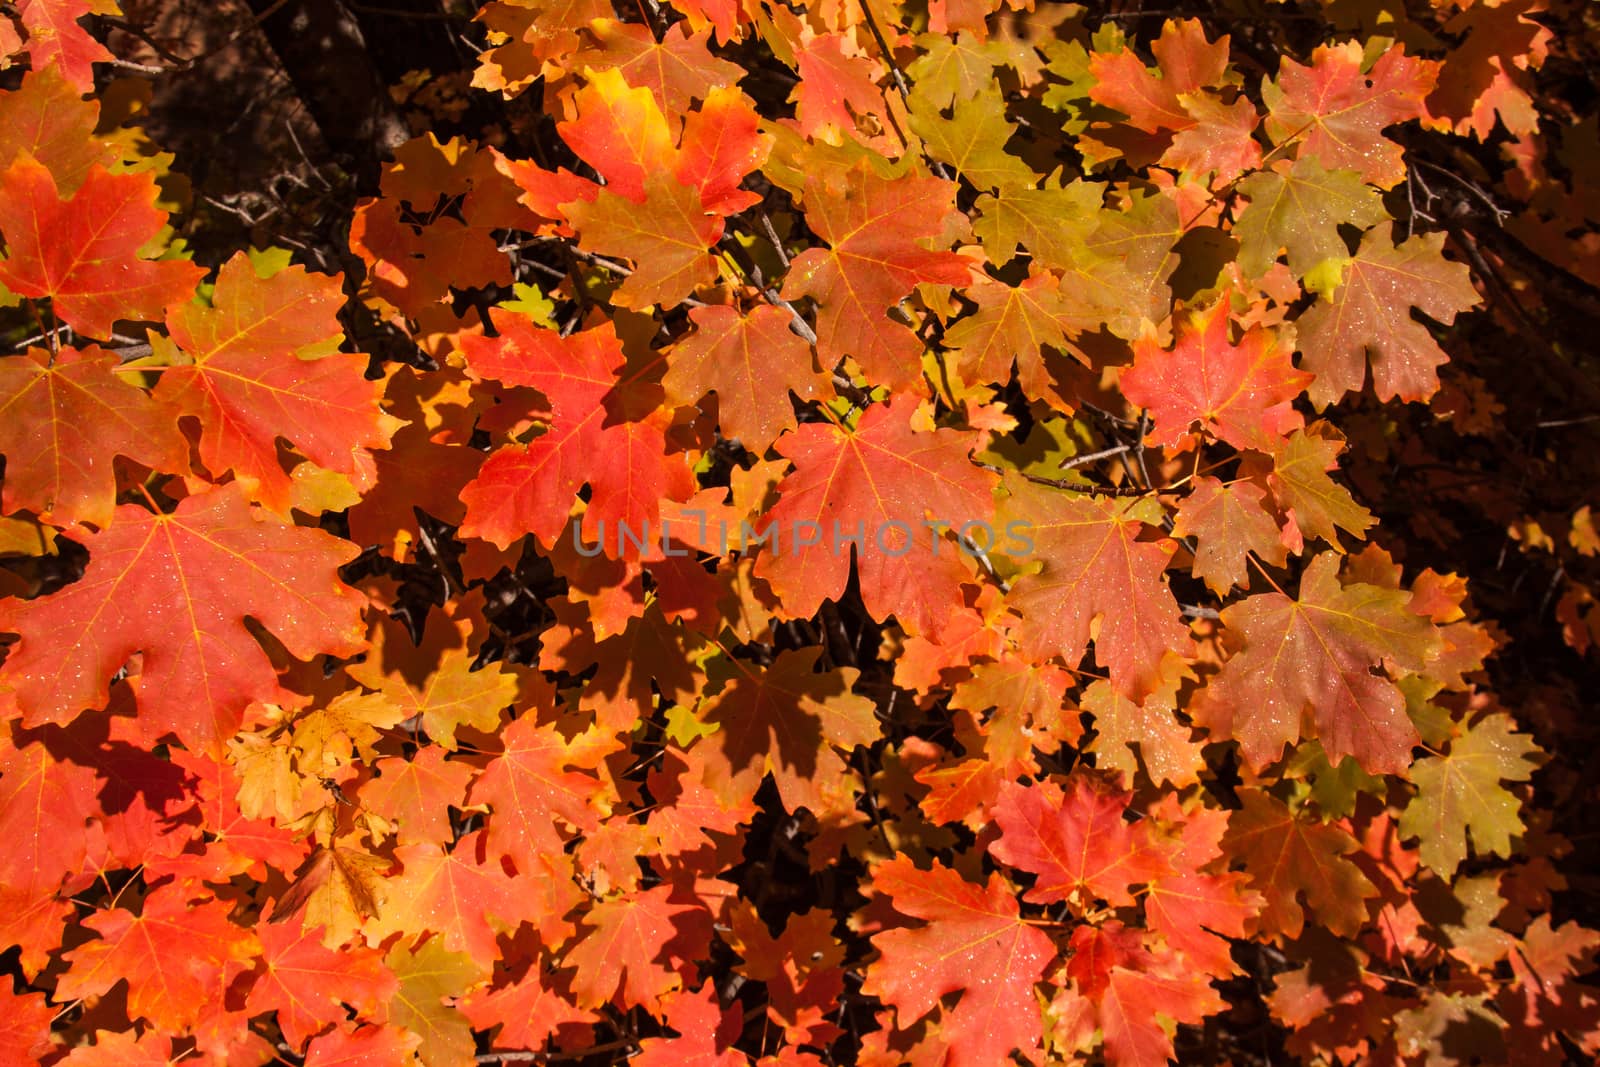 Bright Zion leaves in Fall. by kobus_peche